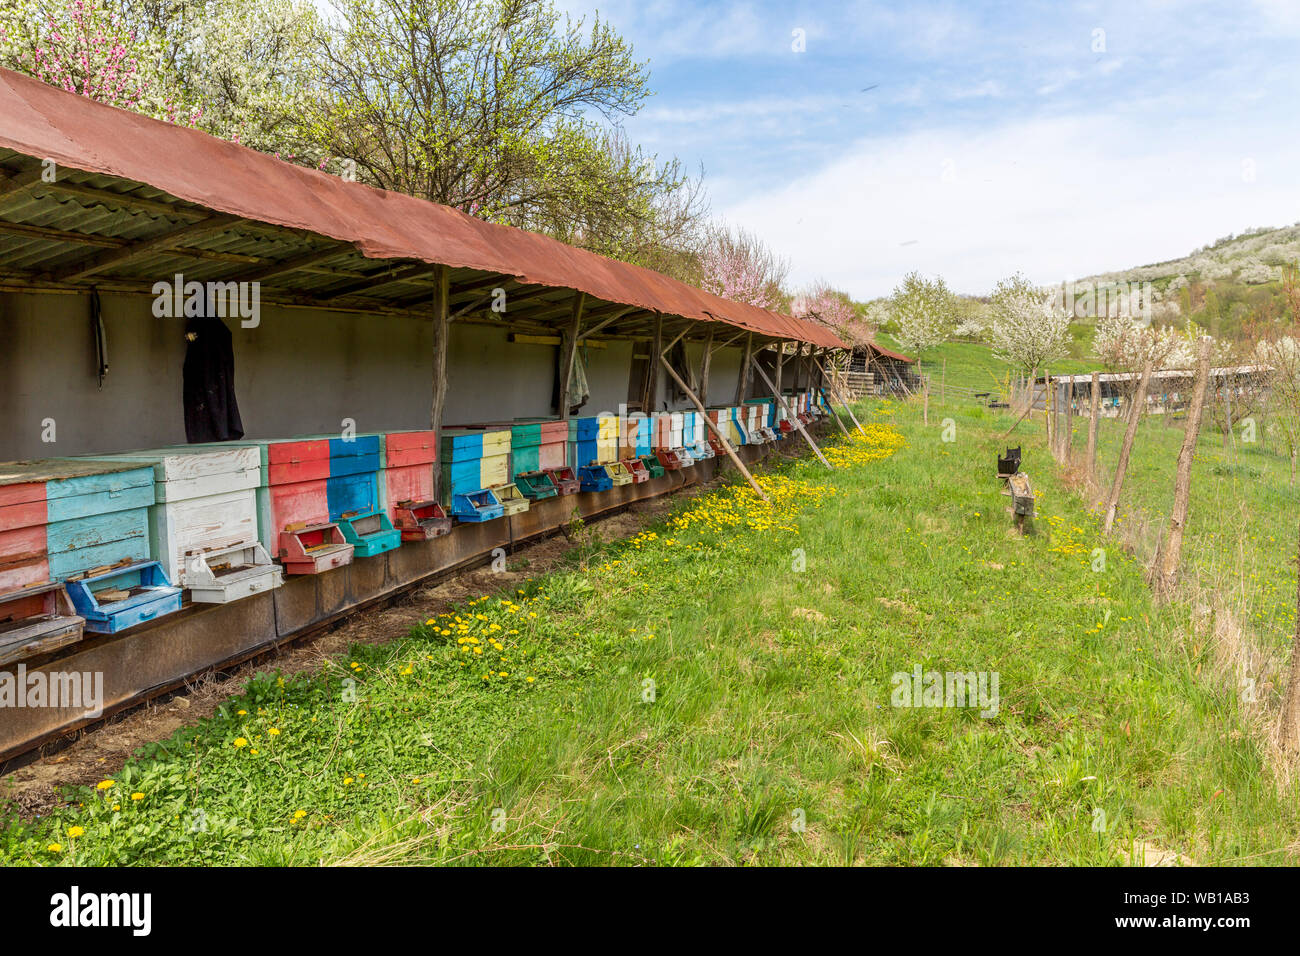 Rumania, Ciresoaia, beehives at flowering cherry trees Stock Photo